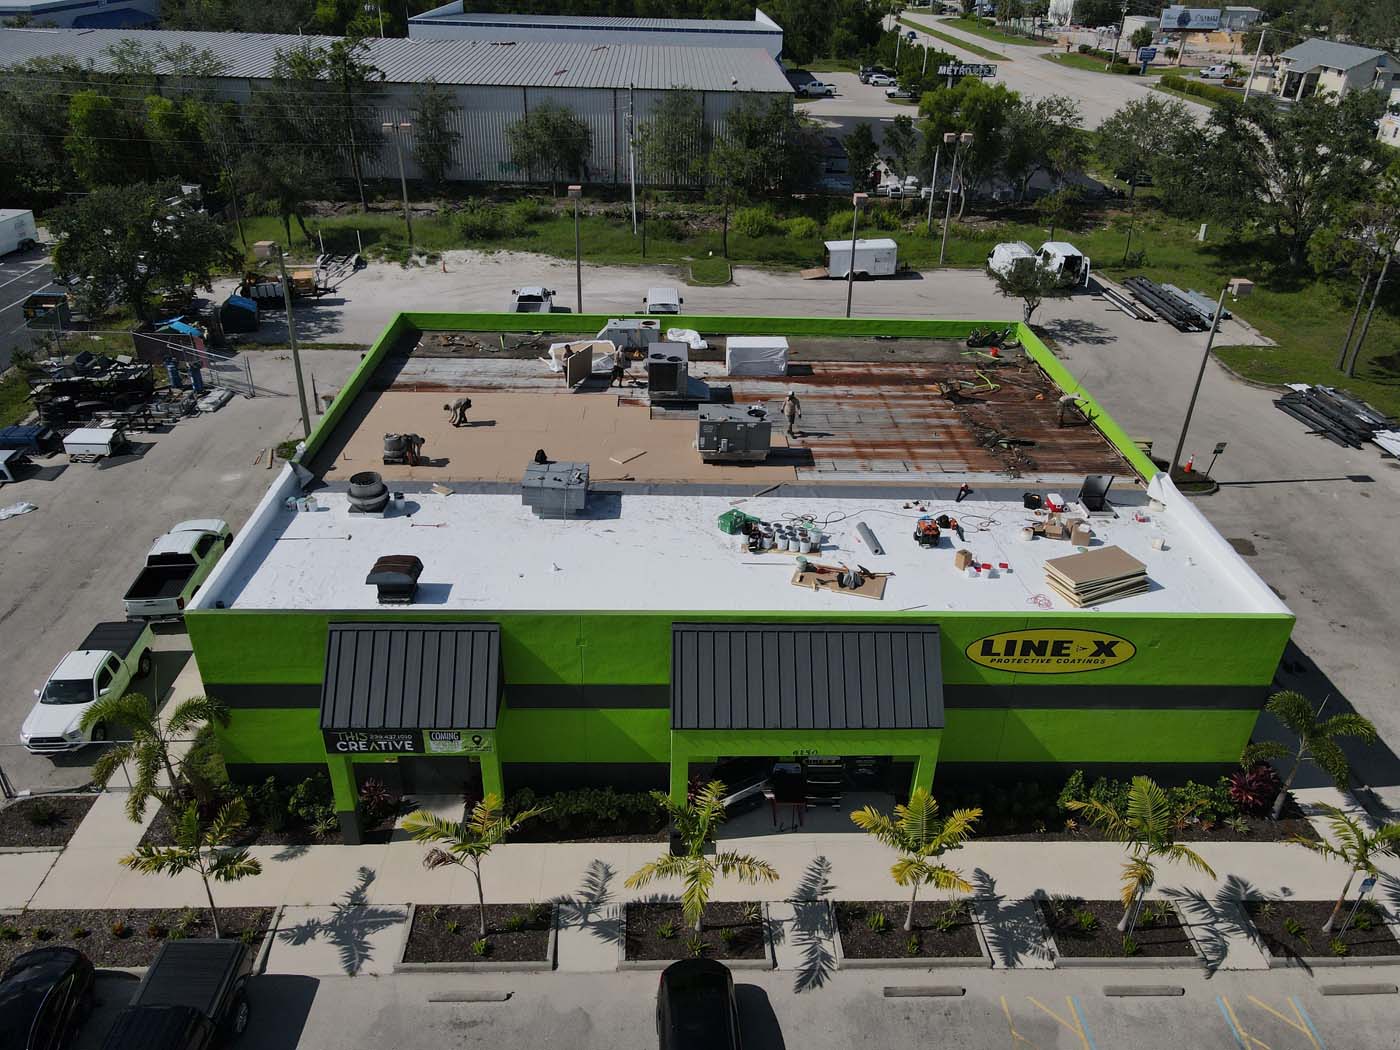 Commercial Flat Roof for Line-X